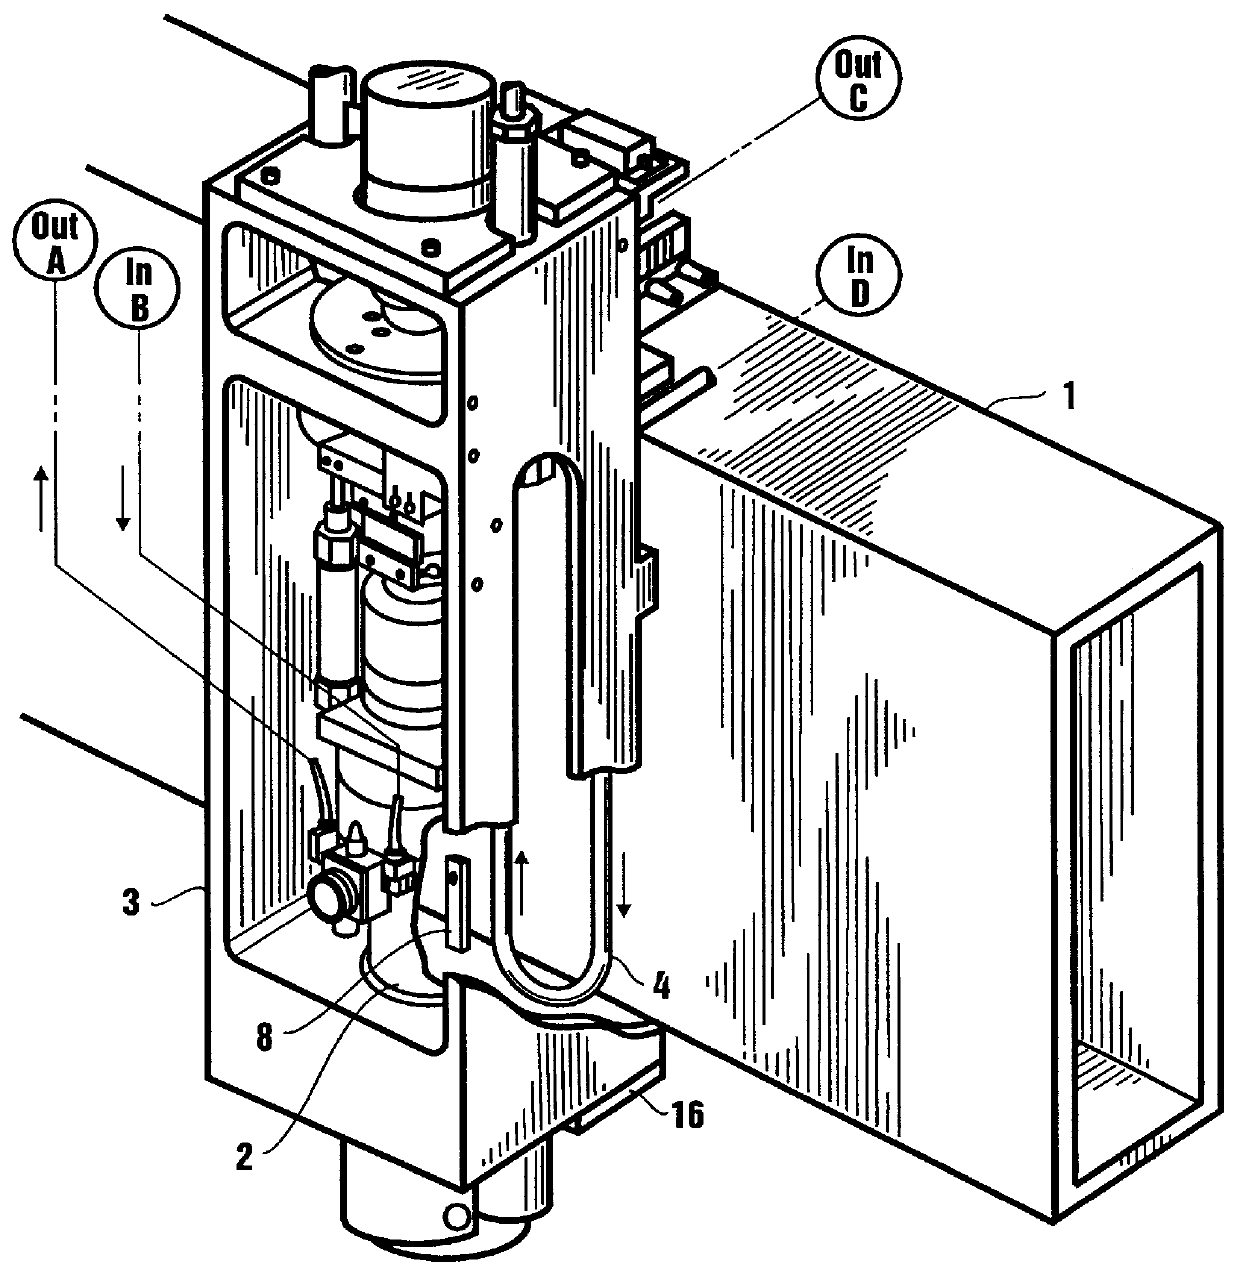 Thermal equalization system